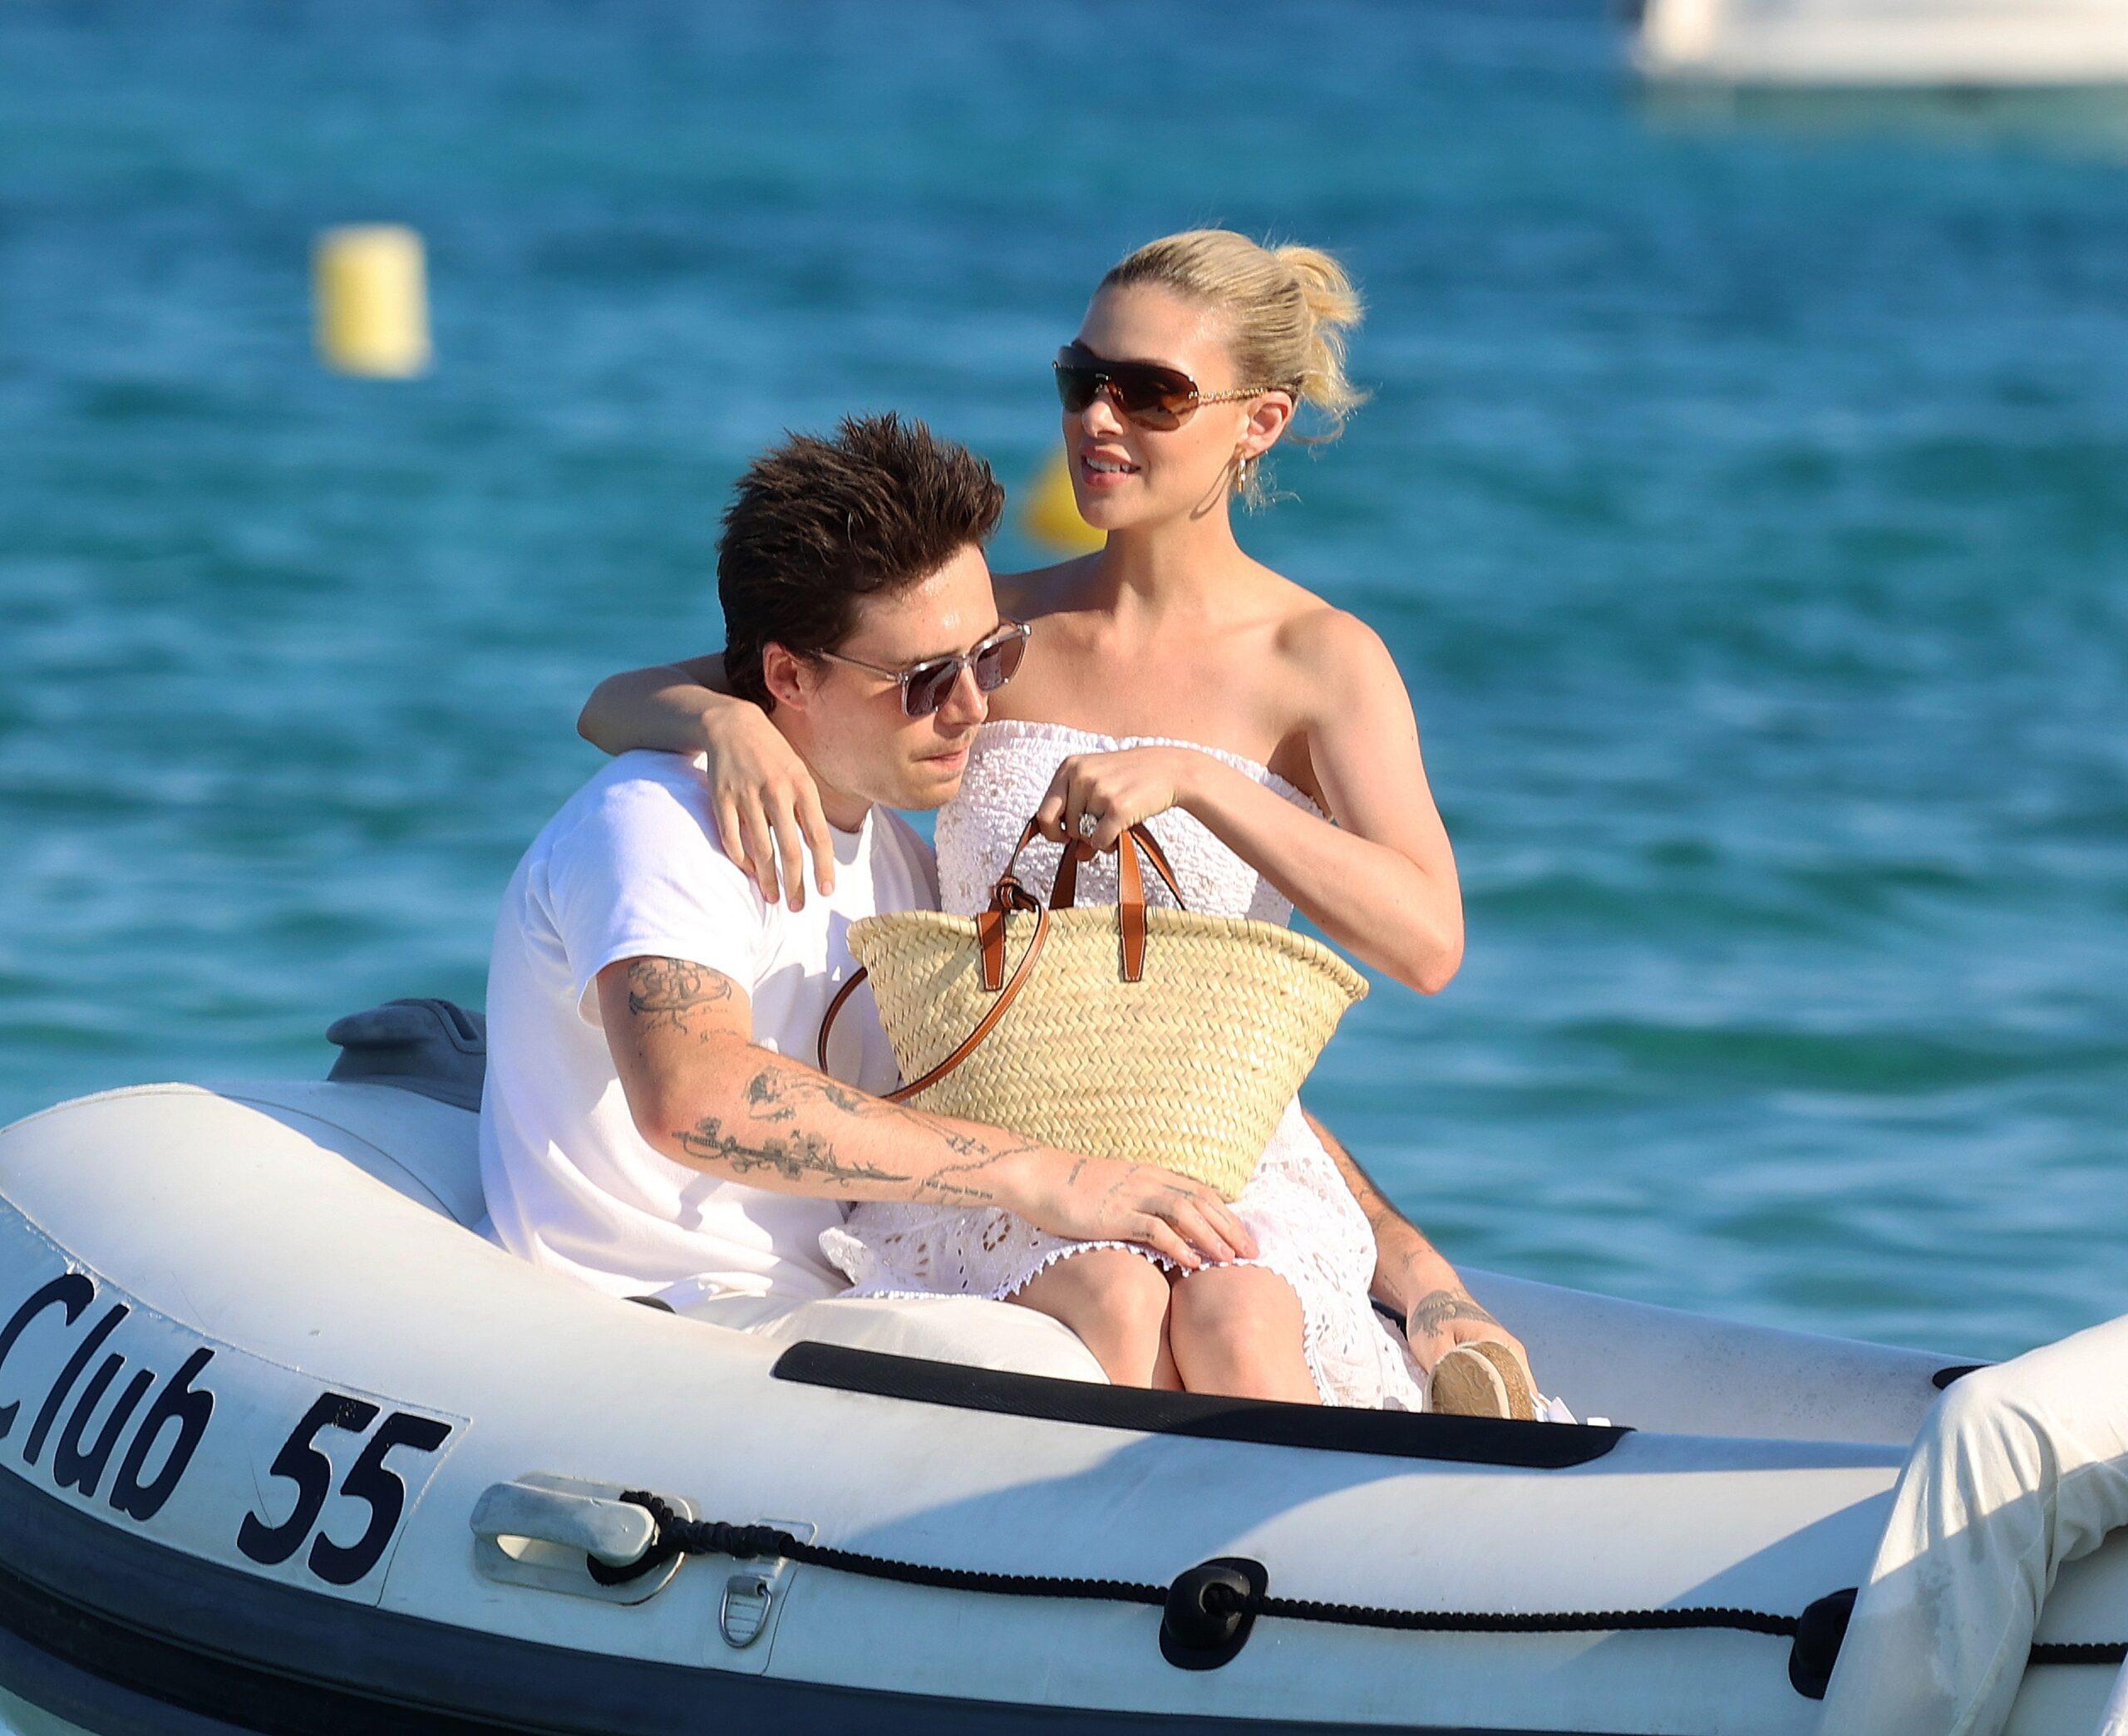 Brooklyn Beckham and t Nicola Peltz at the club 55 in St tropez France St tropez on july 13 2022